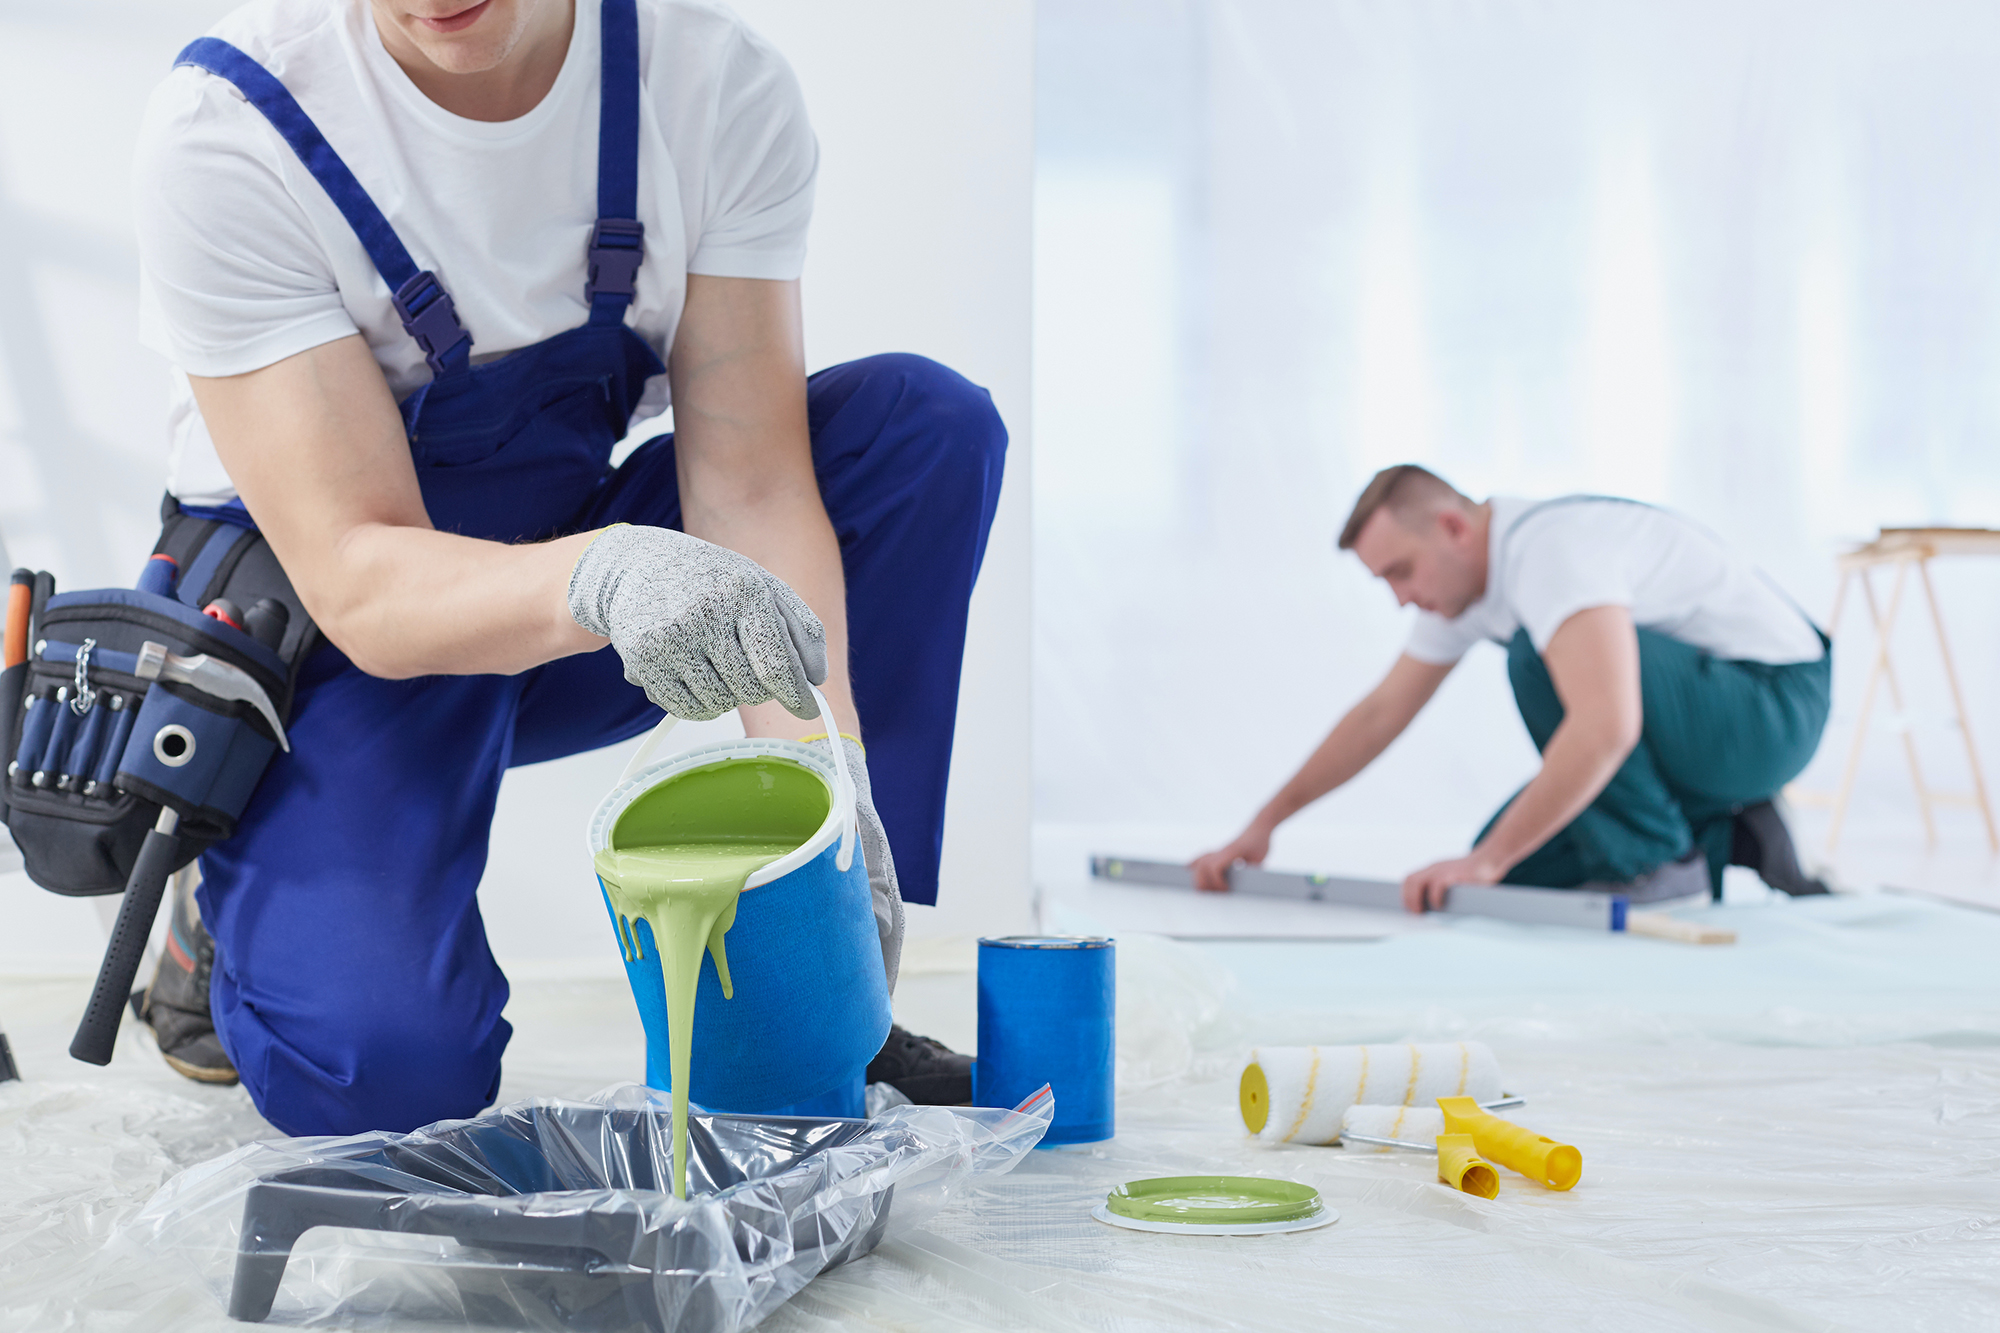 Painter and decorators | FMB, Federation of Master Builders